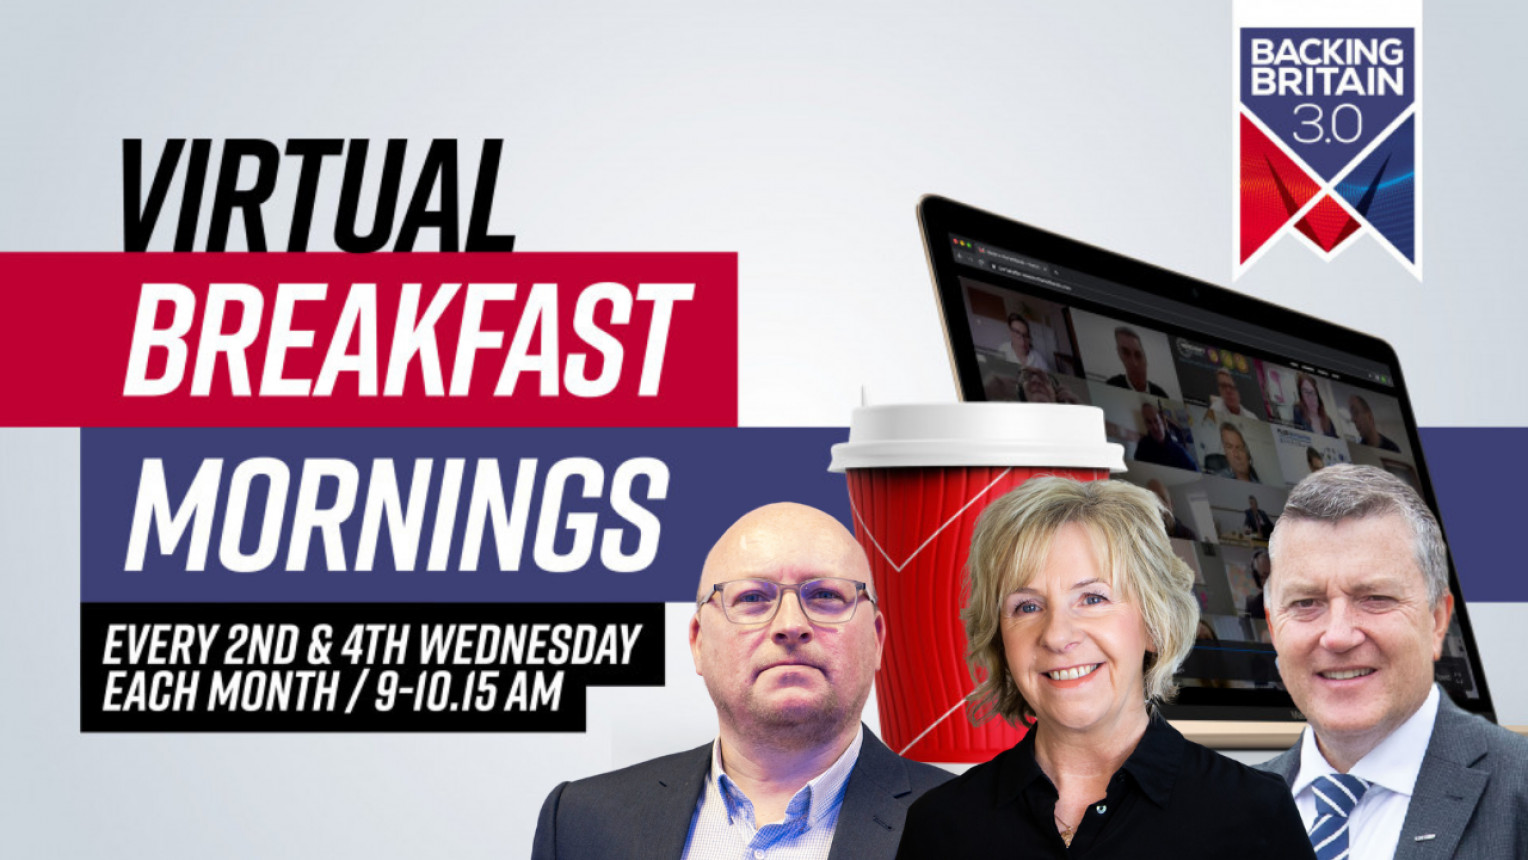 Backing Britain Virtual Breakfast Morning with Citizen Machinery, Hayley Group Limited & Greyhound Box